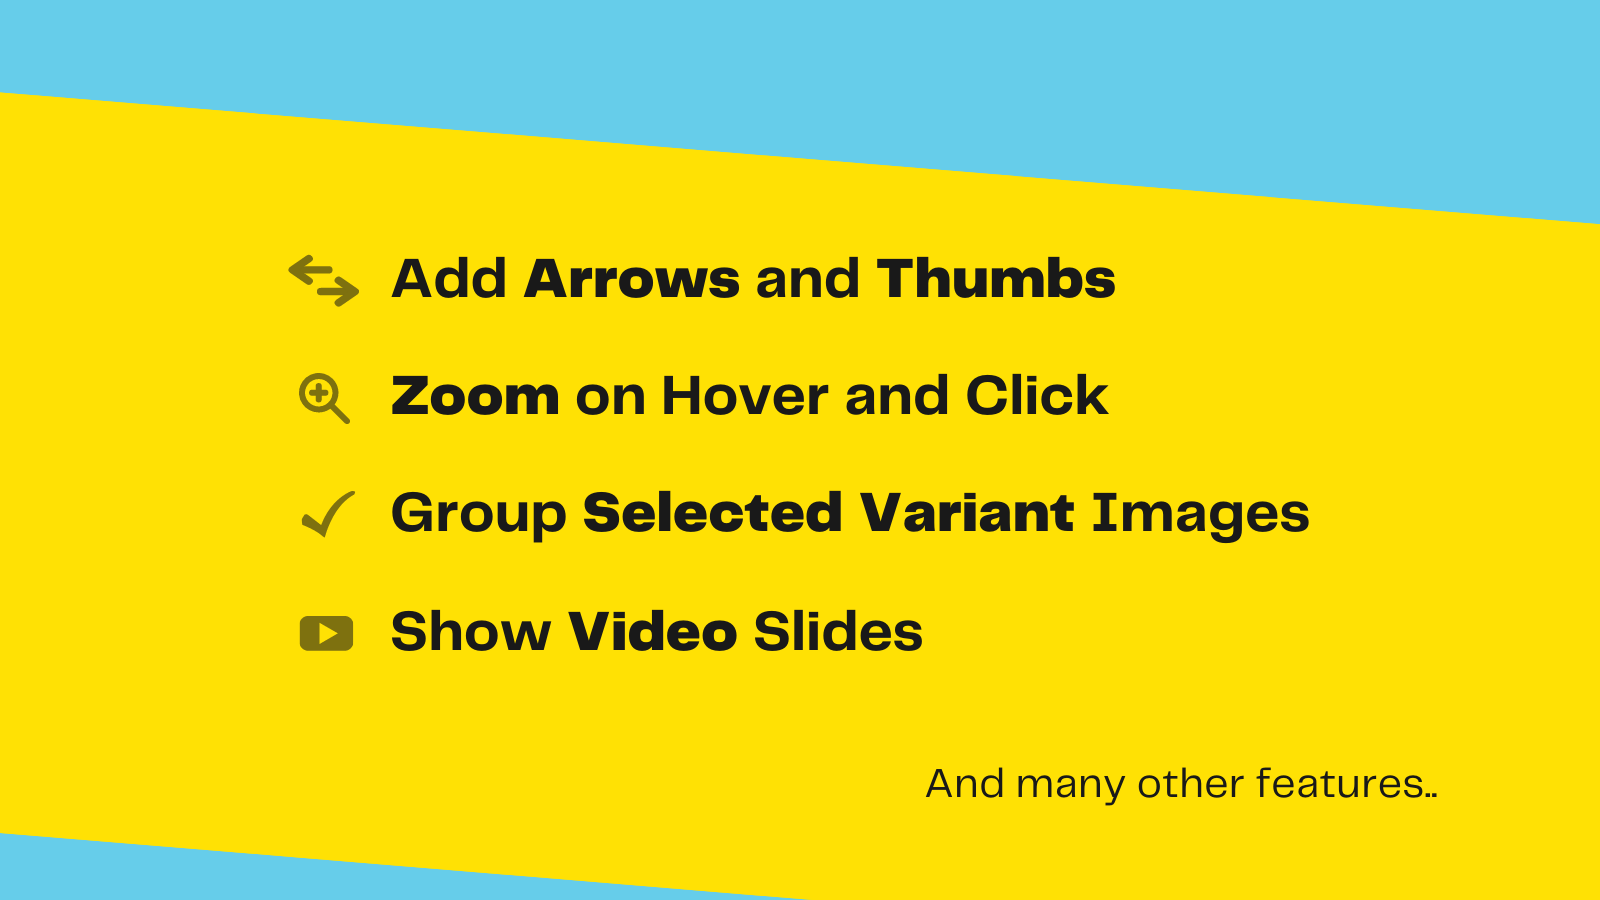 A Slider with Zoom, Video Slides and Variant Images Support